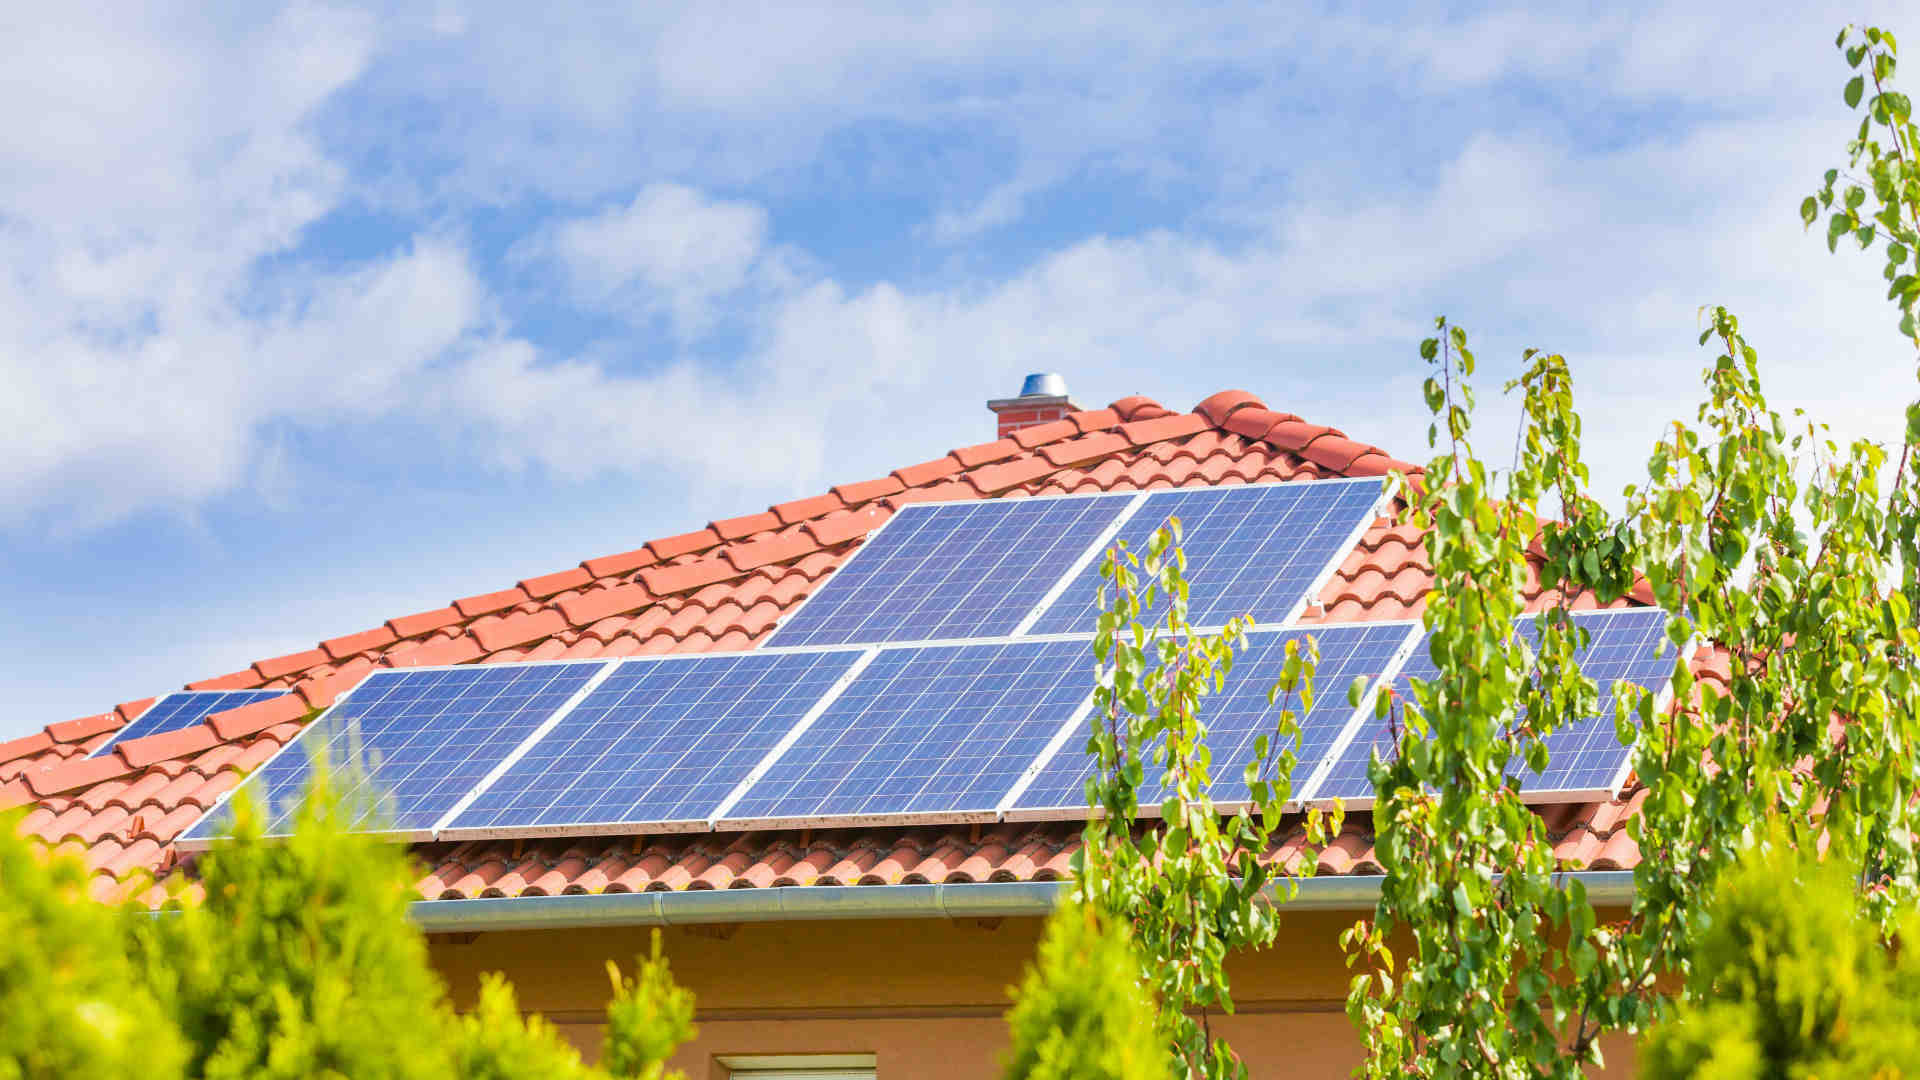 What is the best solar panel company to go with?